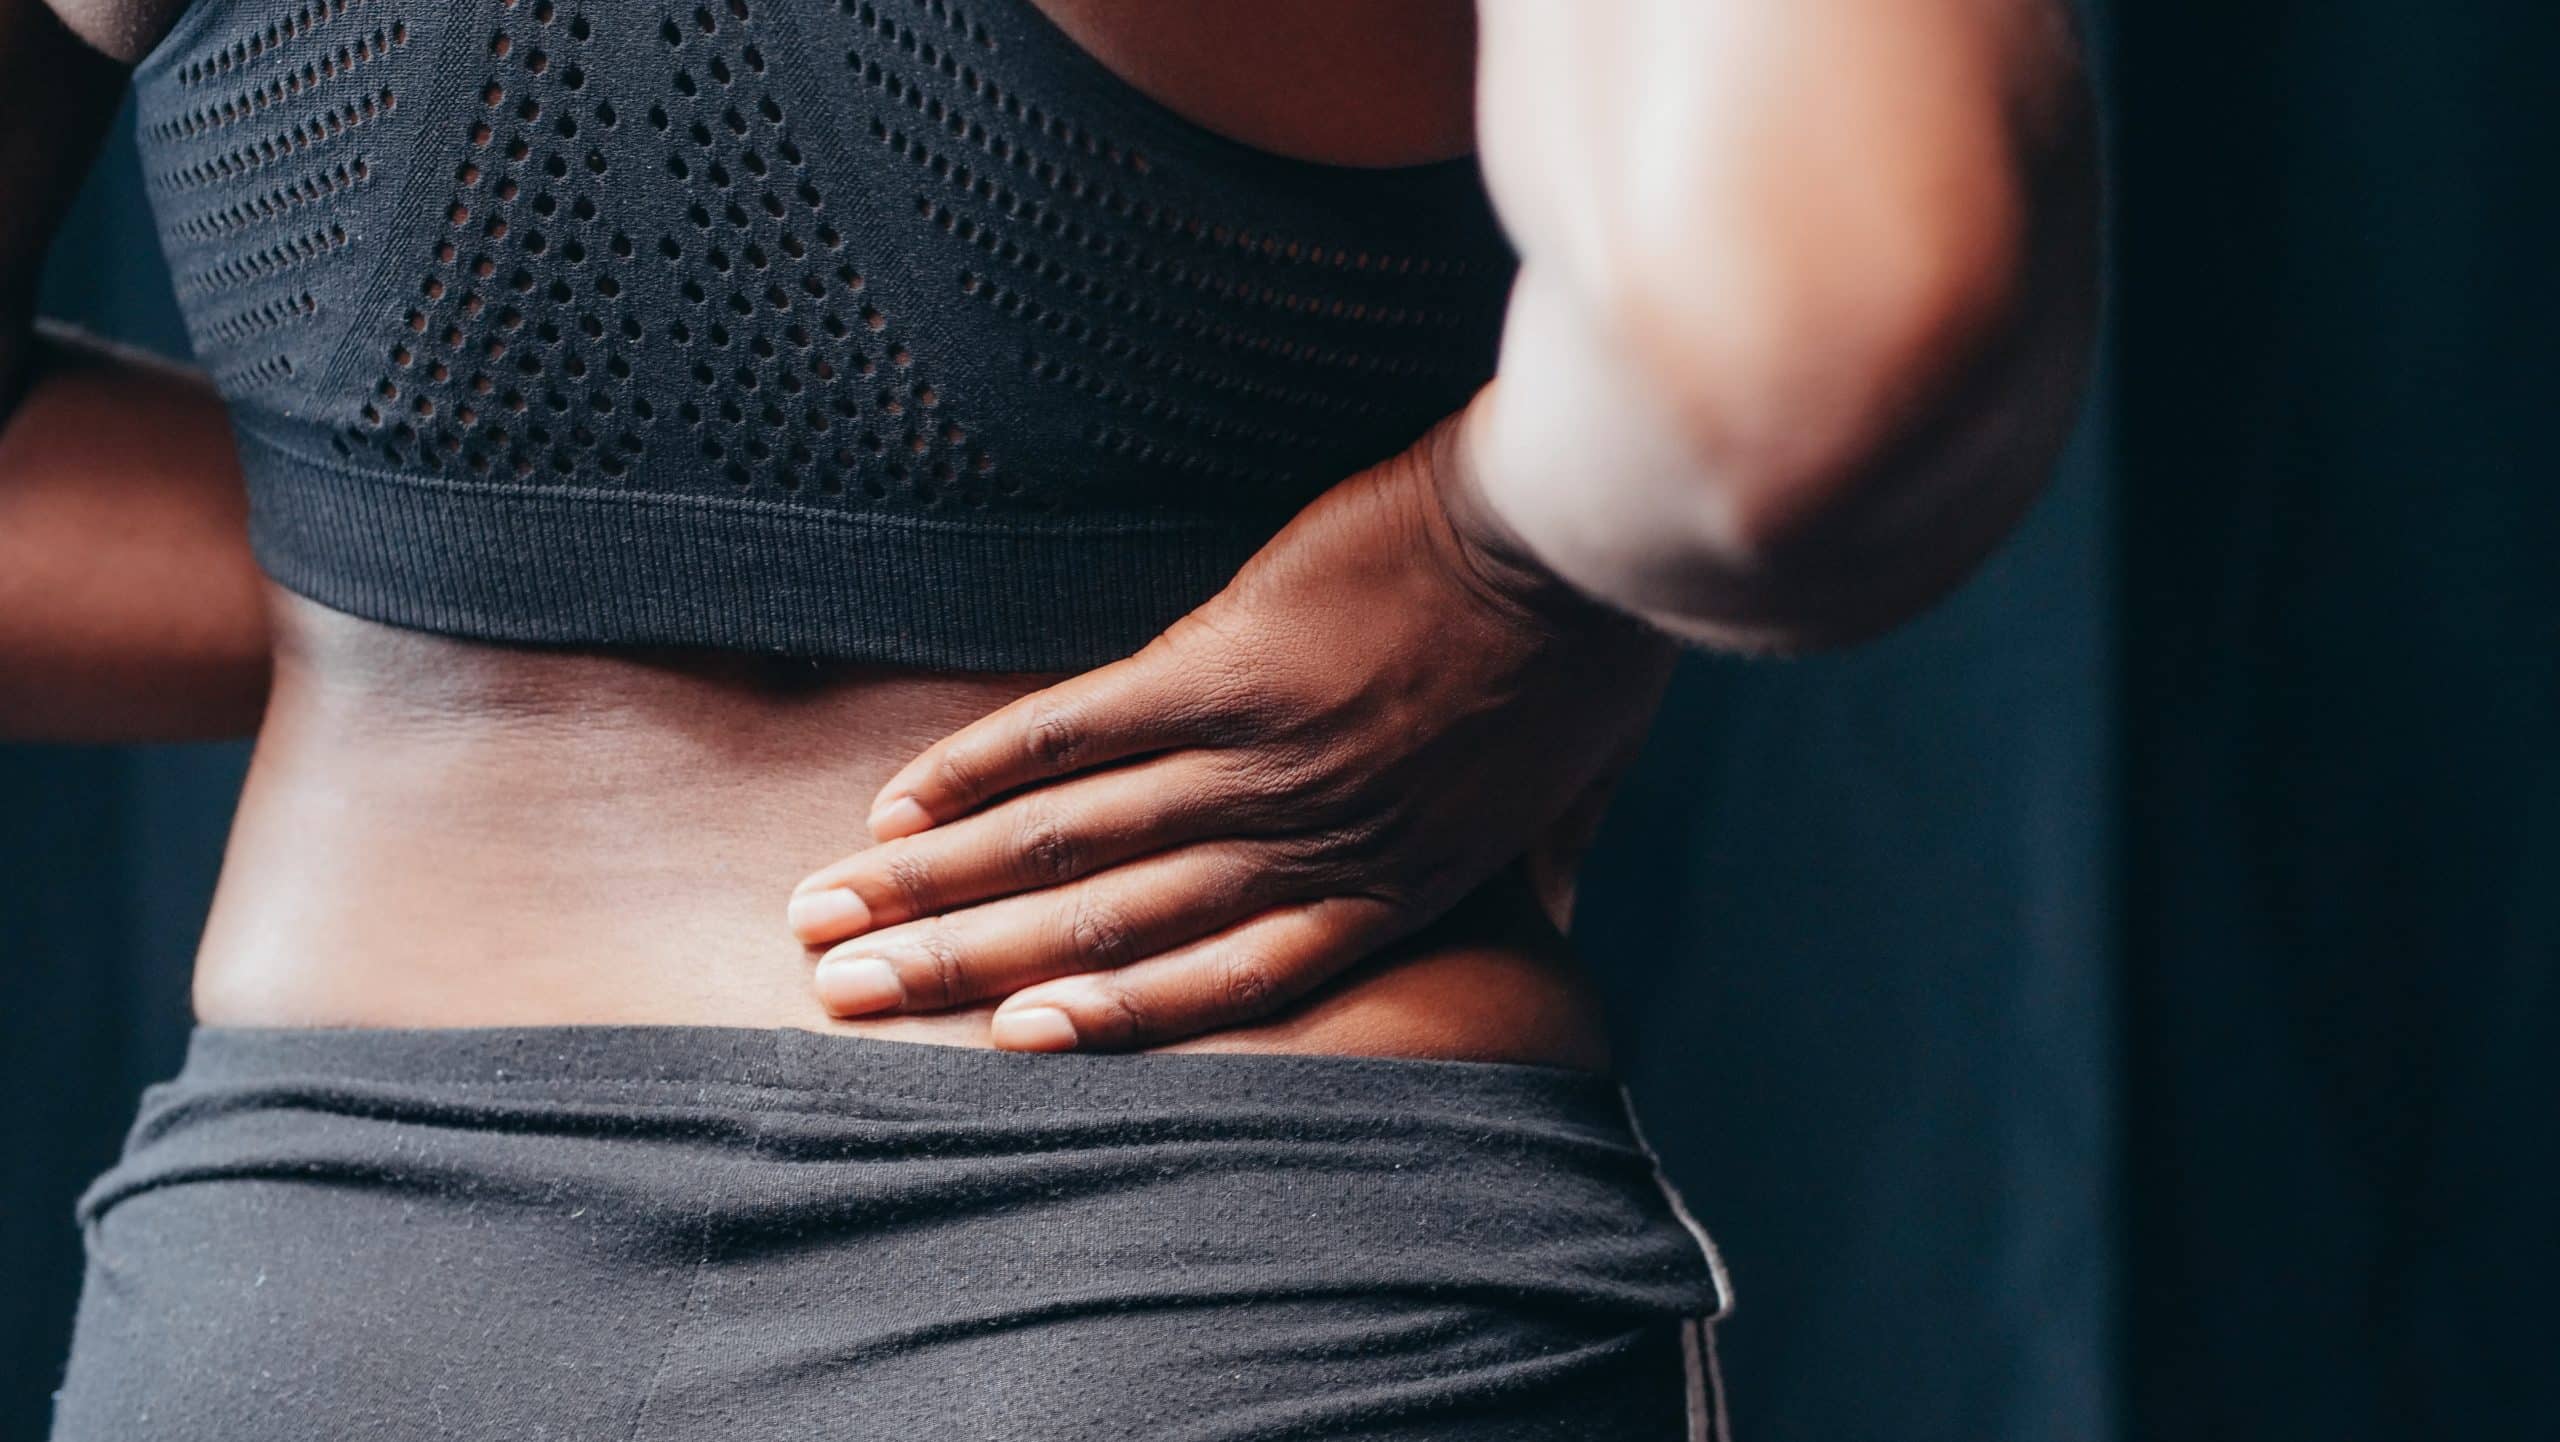 What to Expect After Suffering a Herniated Disk